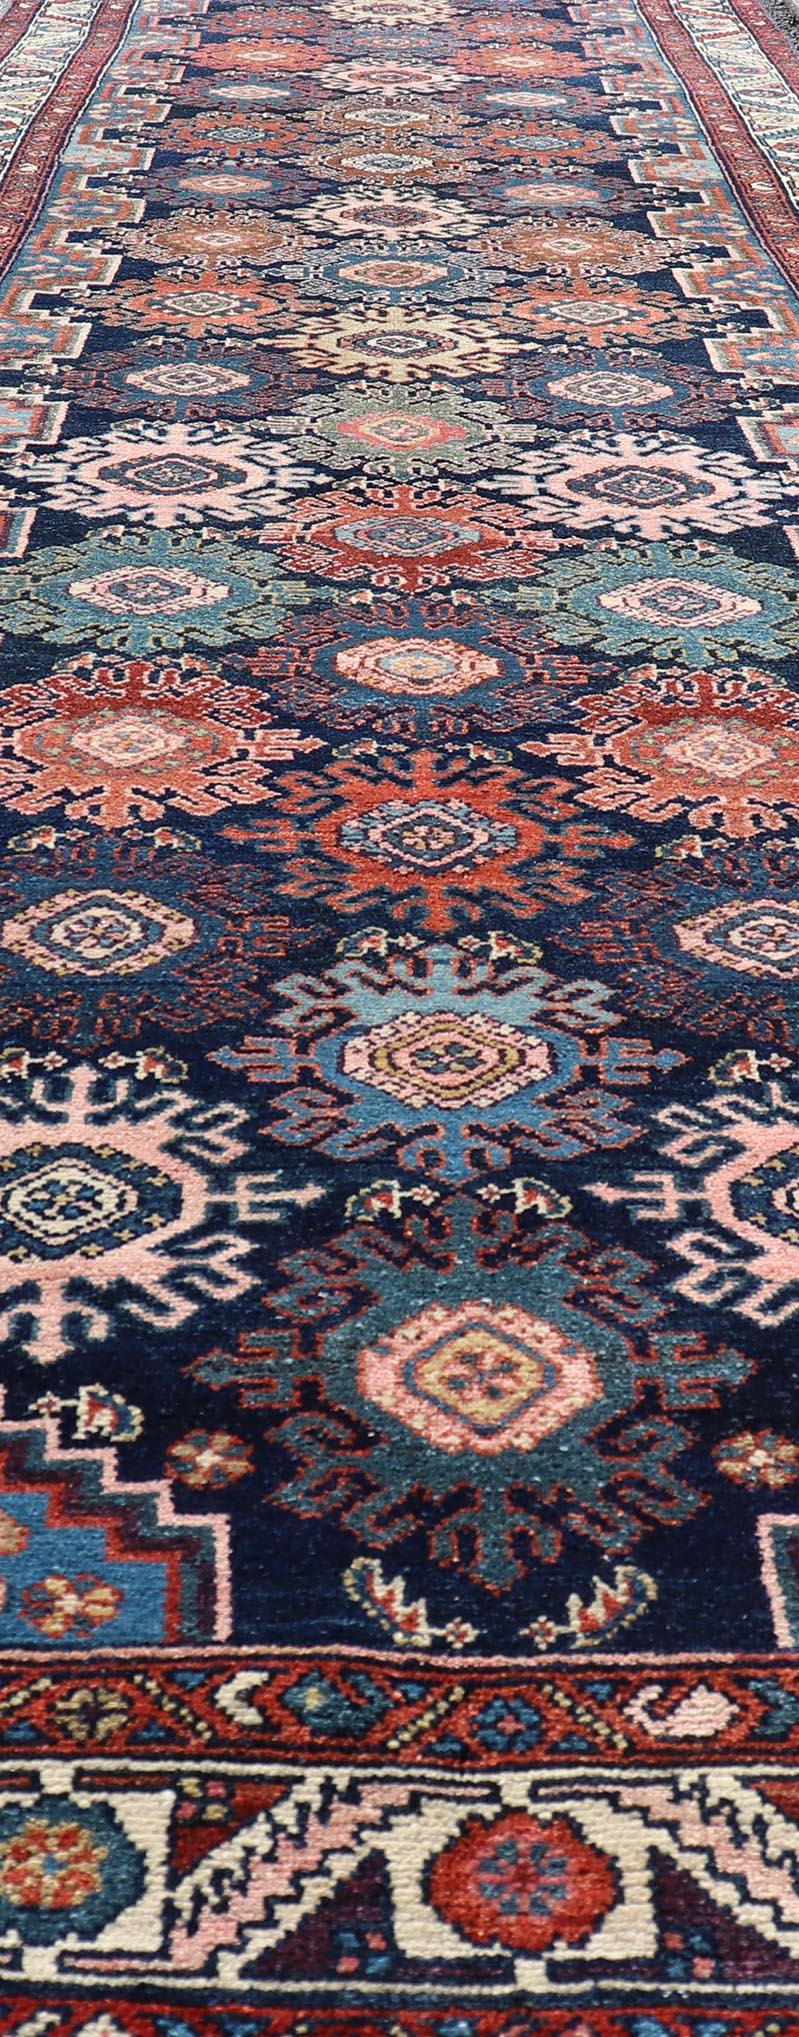 Antique Persian Hamadan Runner with All-Over Geometric Motifs In Jewel Tones For Sale 5